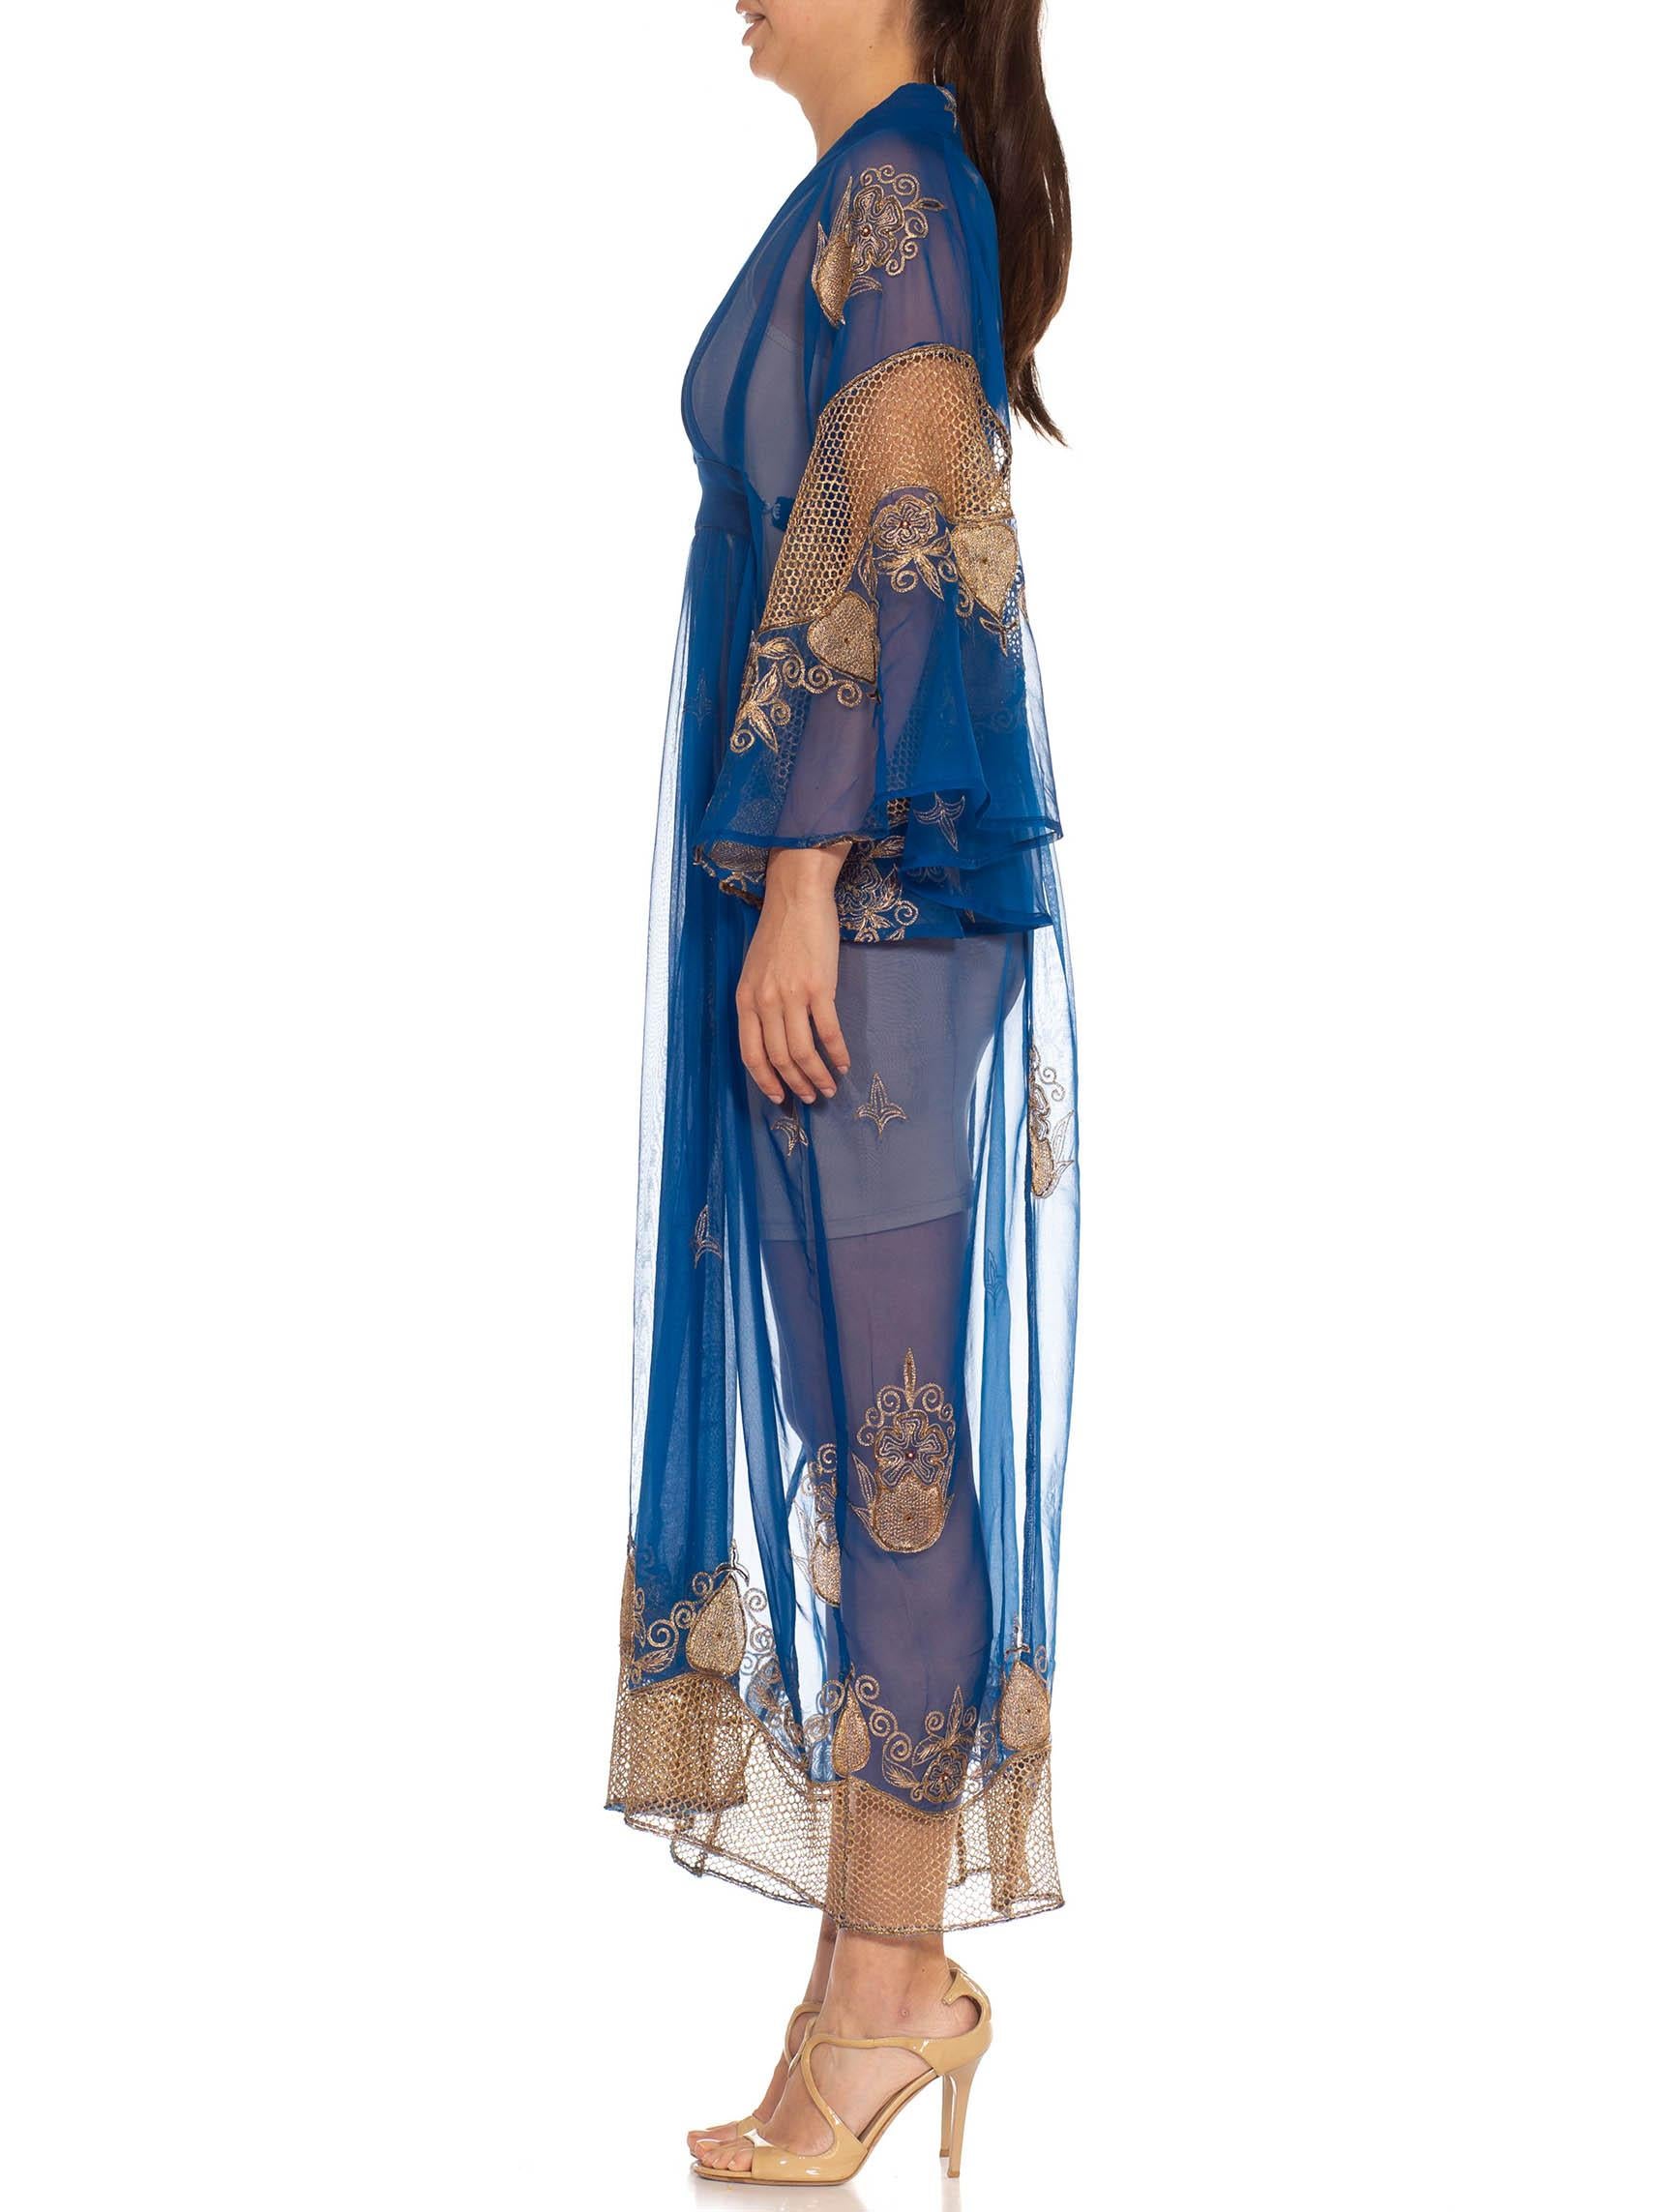   Morphew Collection Blue & Gold Silk Kaftan Made From Vintage Saris 
MORPHEW COLLECTION is made entirely by hand in our NYC Ateliér of rare antique materials sourced from around the globe. Our sustainable vintage materials represent over a century